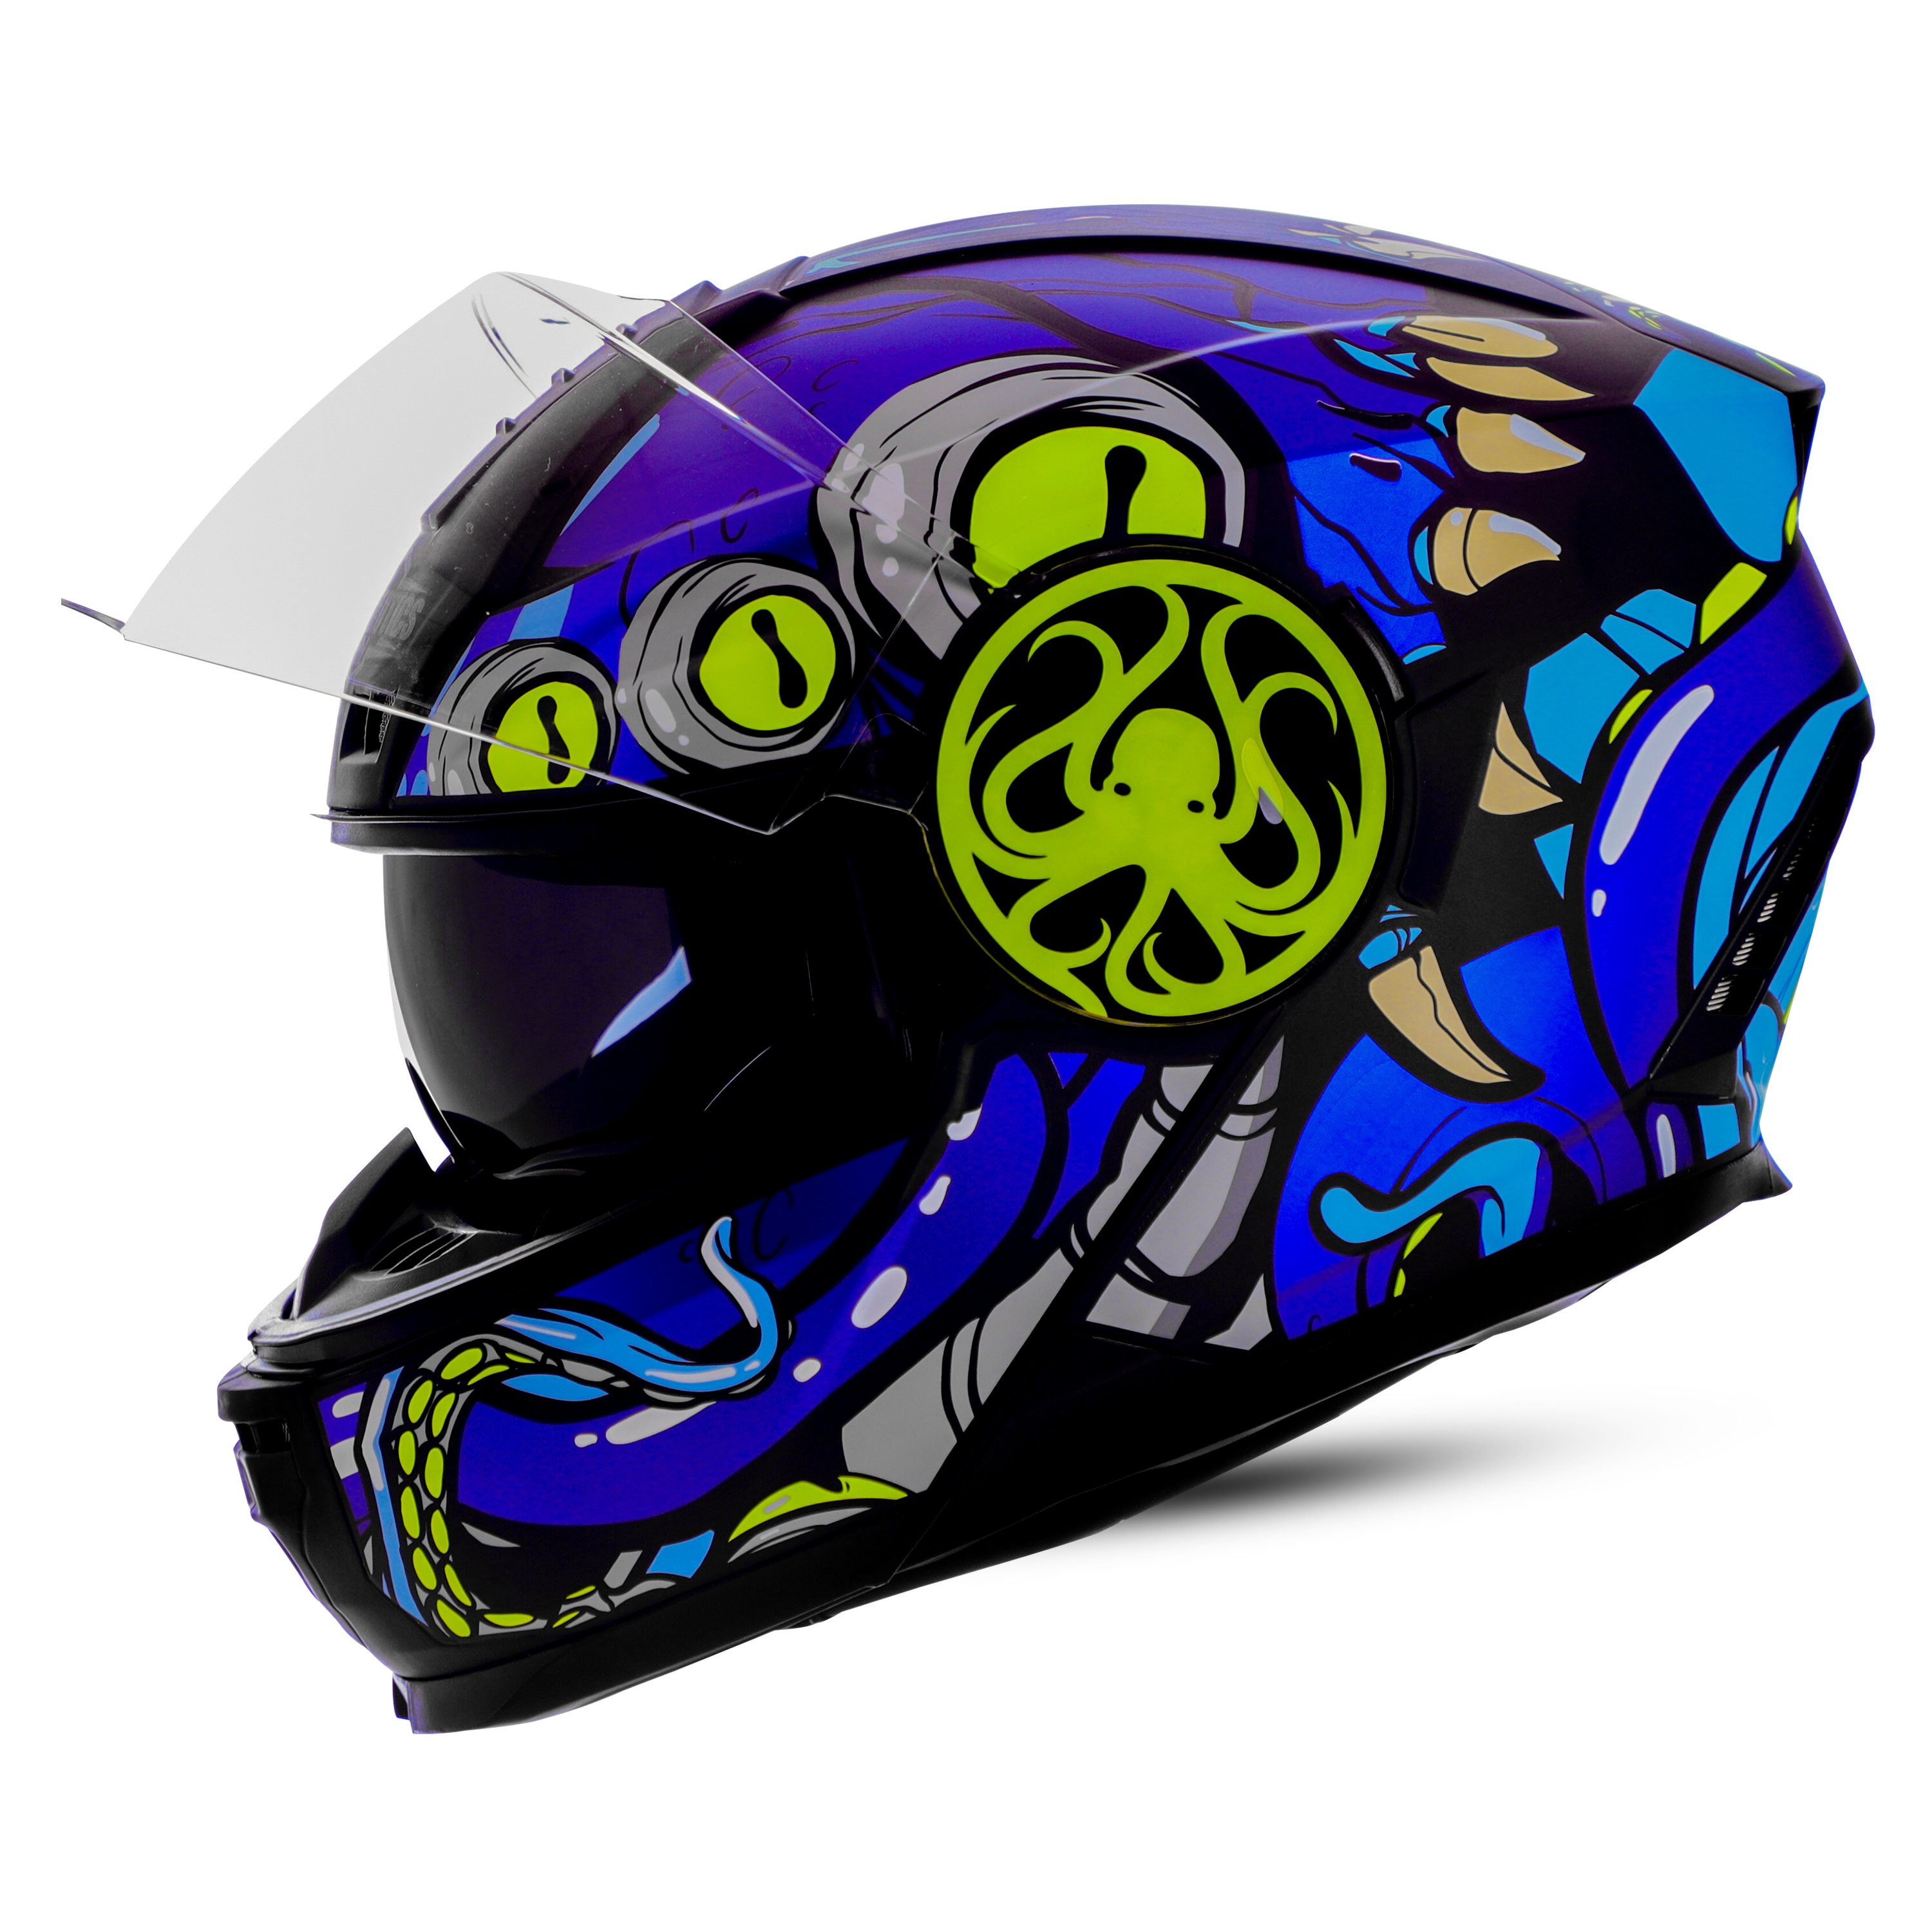 Steelbird SBH-40 Octopus ISI Certified Full Face Graphic Helmet For Men And Women With Inner Smoke Sun Shield (Glossy Black Chrome Blue)